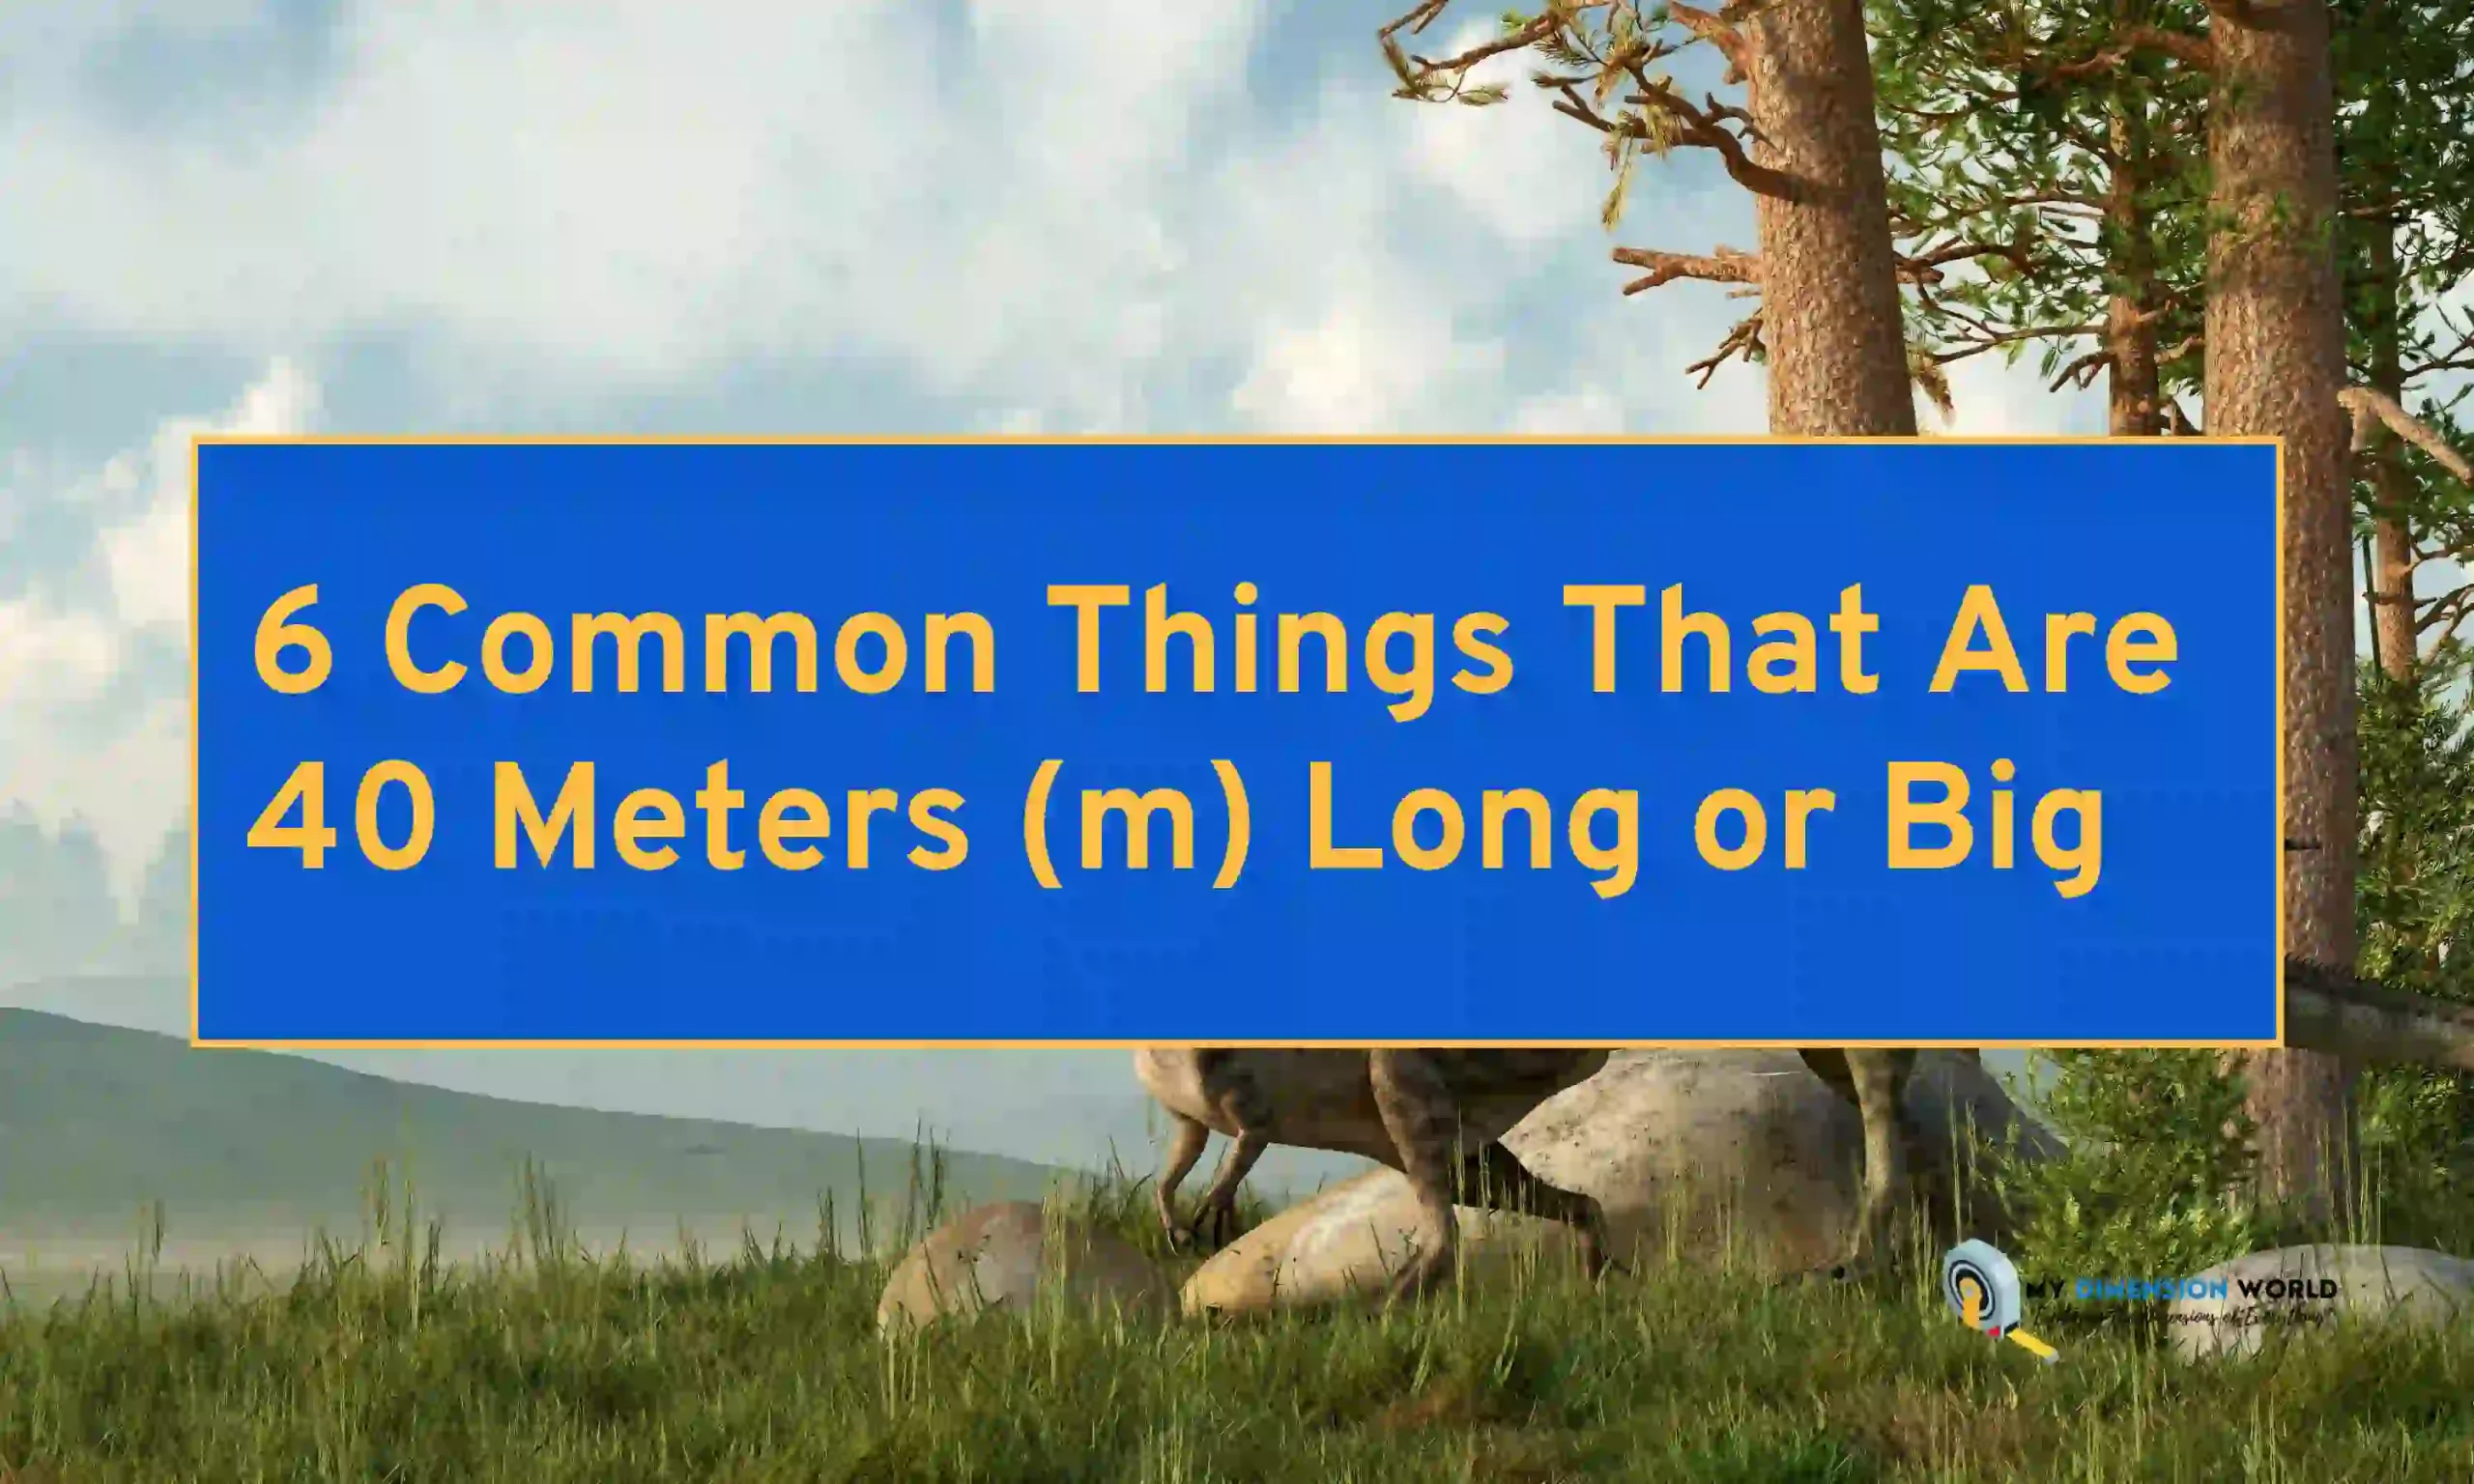 6 Common Things That Are 40 Meters (m) Long or Big